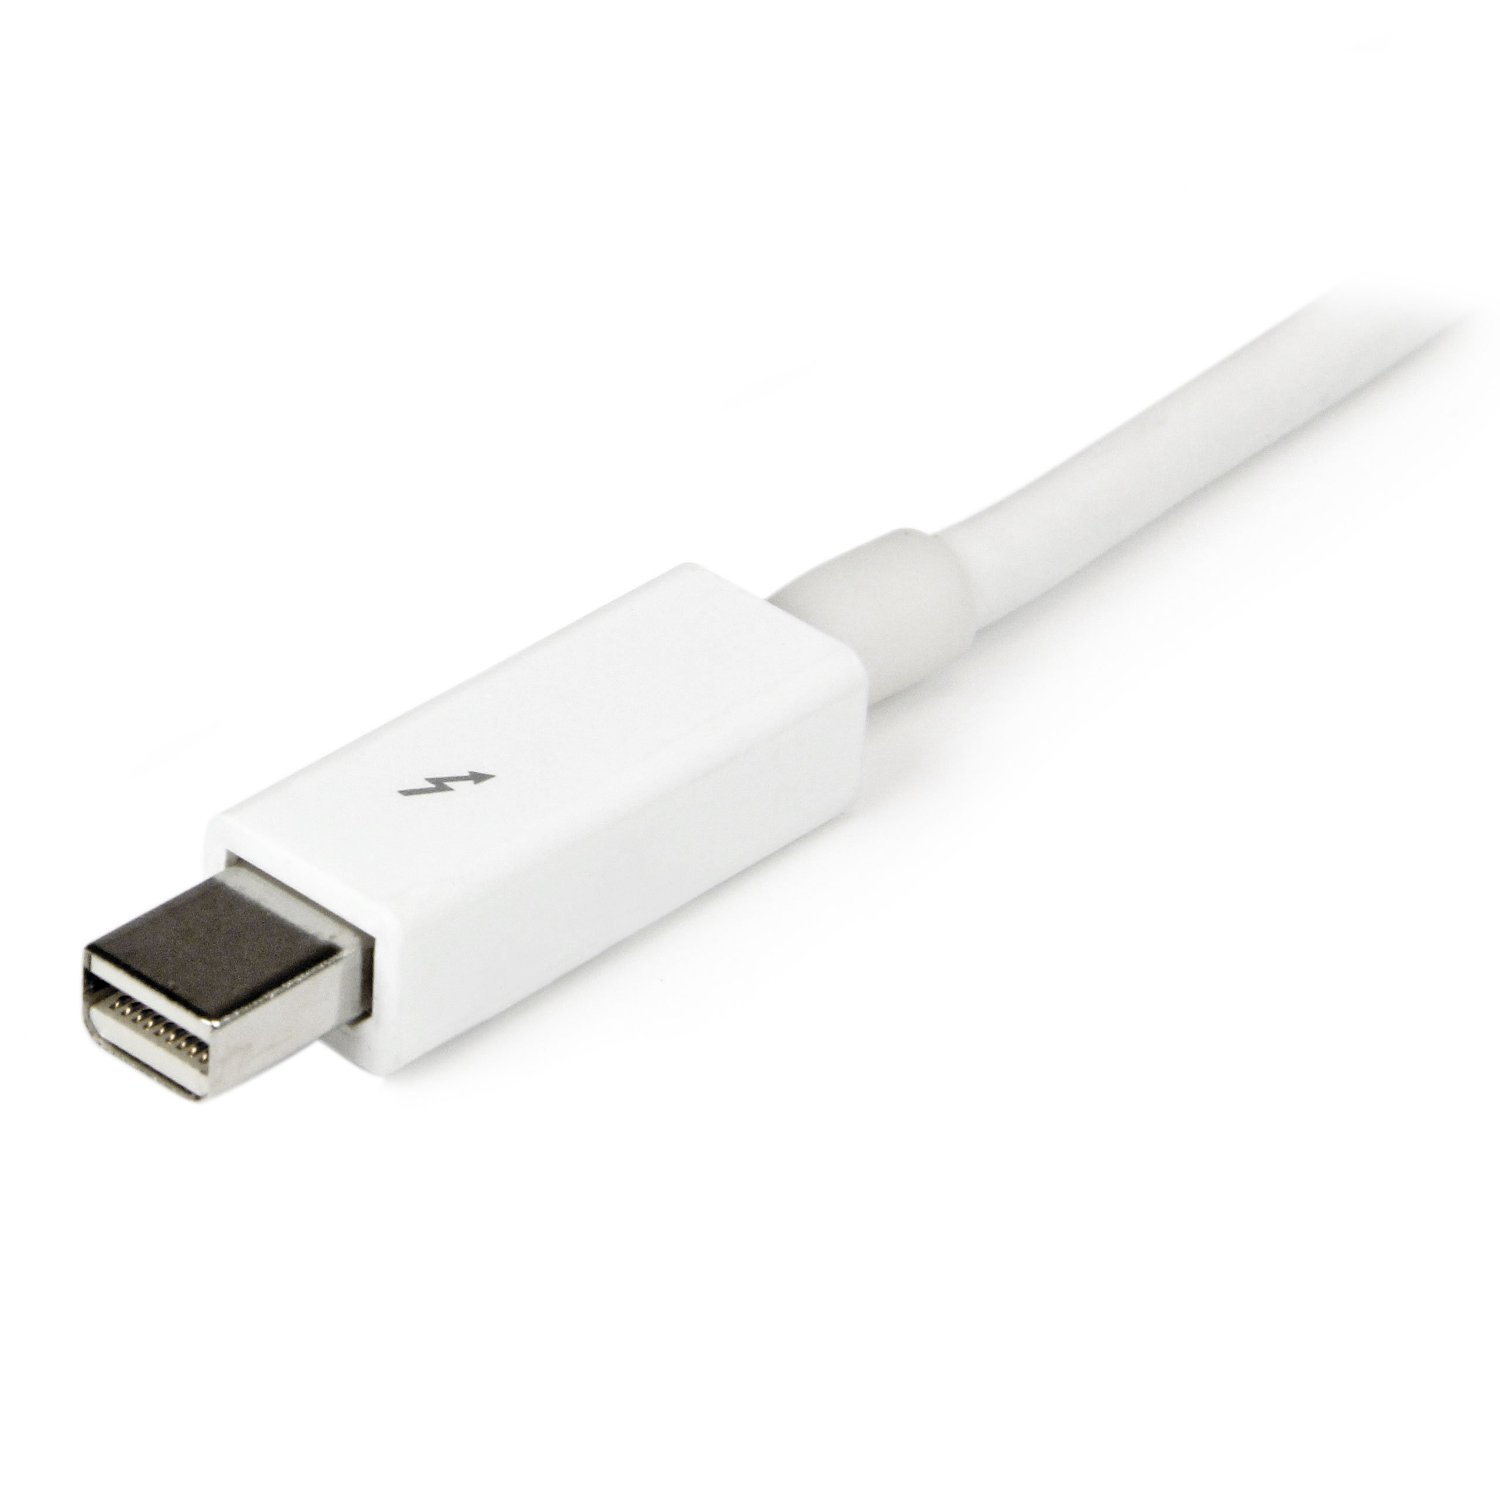 6ft (1.8m) Thunderbolt™ 3 Cable (20Gbps), Thunderbolt Cables, USB-C Cables,  Adapters, and Hubs